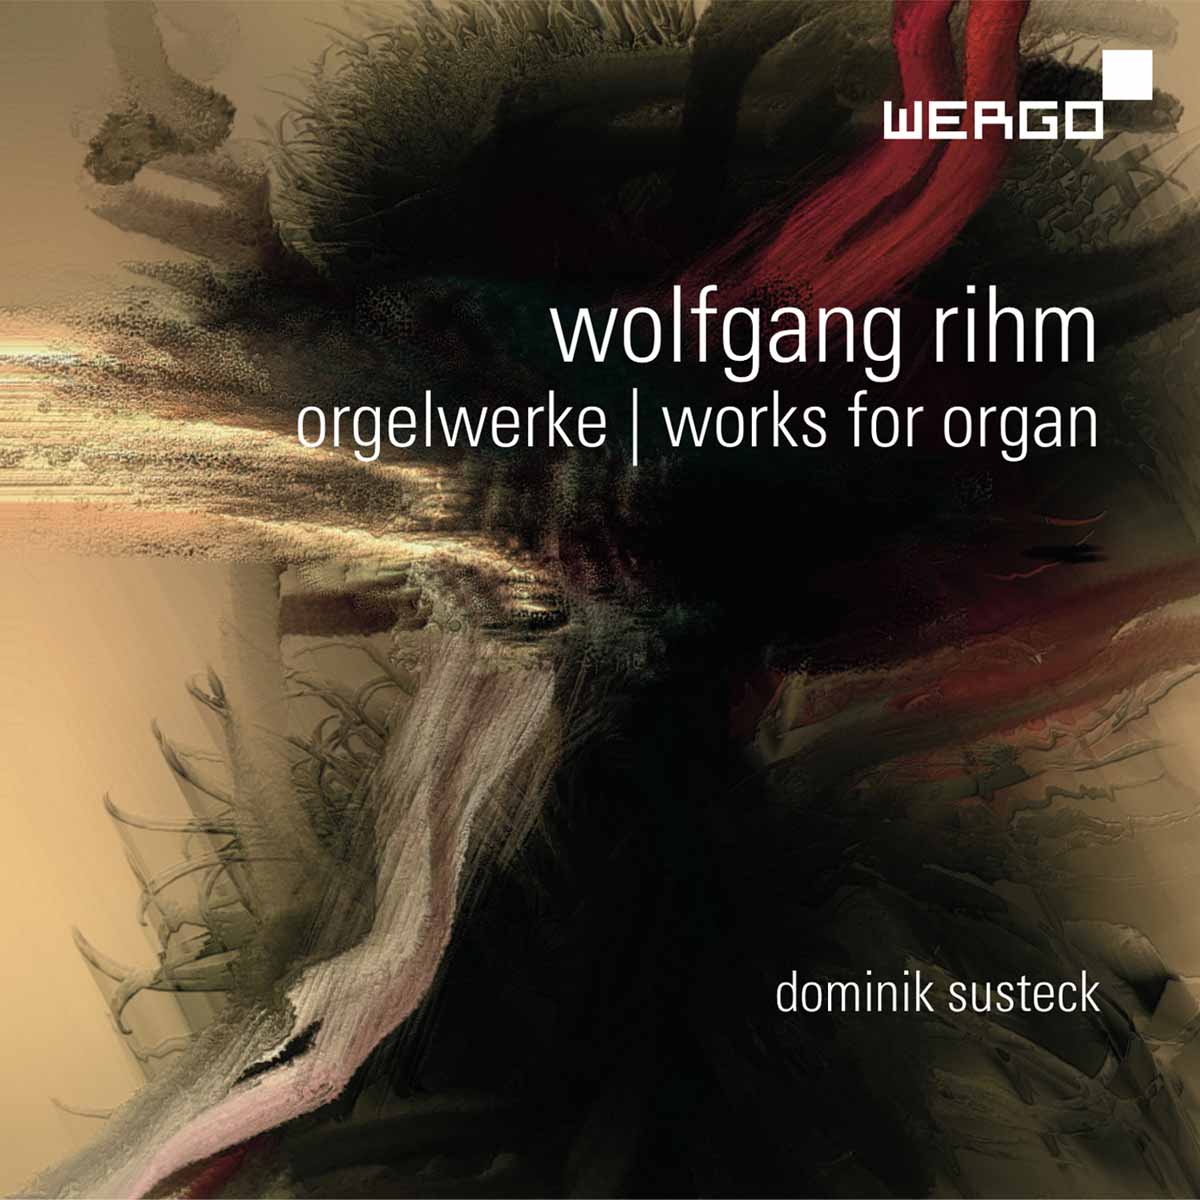 WORKS FOR ORGAN